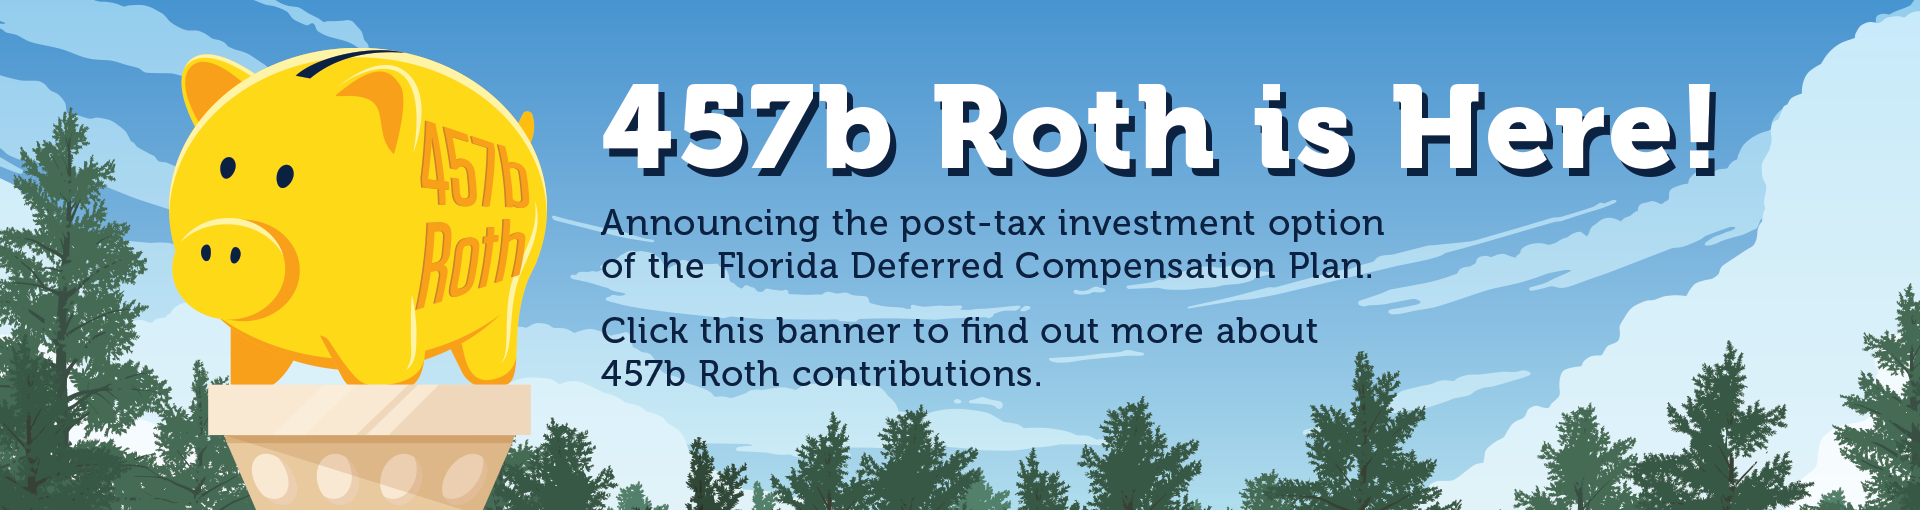 457b Roth is Here!